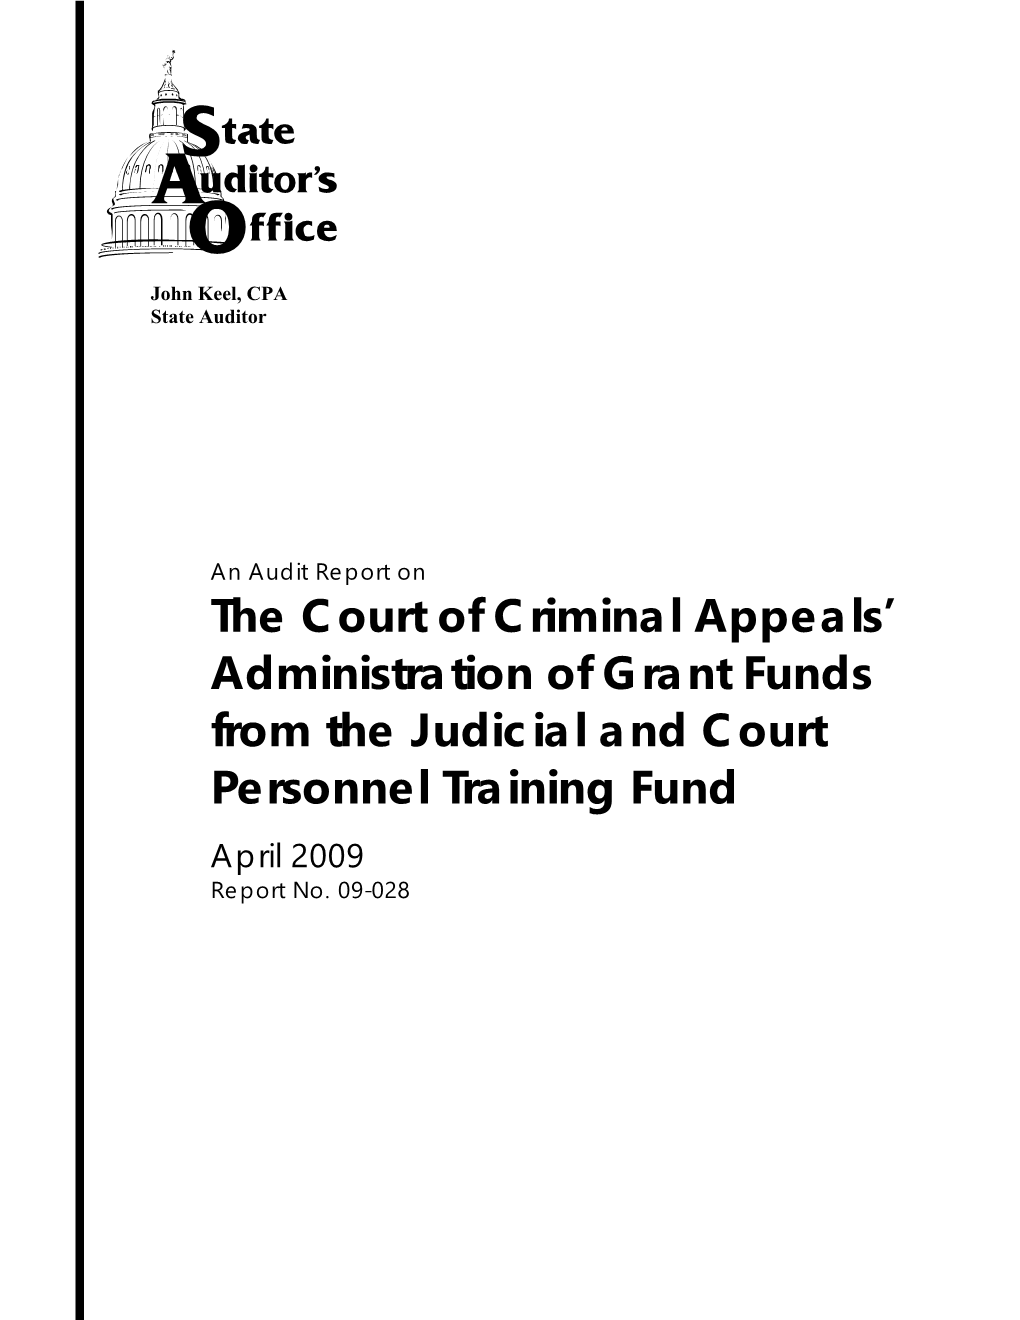 The Court of Criminal Appeals' Administration of Grant Funds From